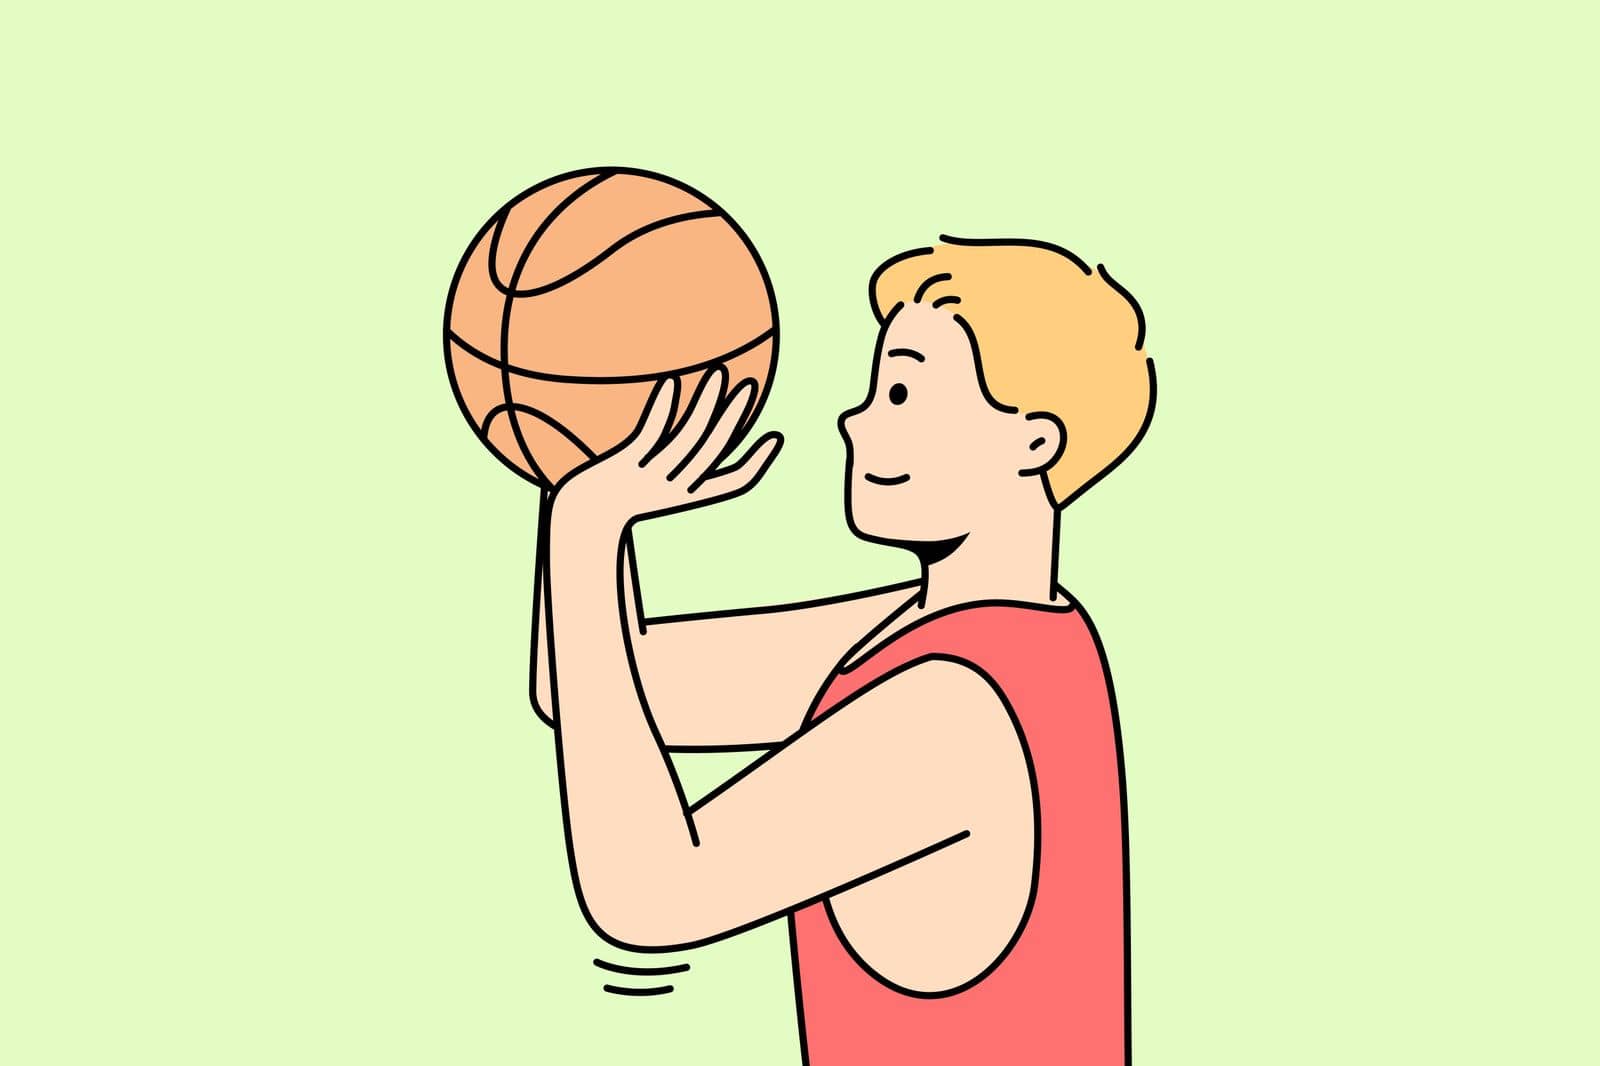 Boy throws ball into hoop or through net. Guy playing basketball or volleyball on court. Basketballer, hoopster, player trying to hit into rim. Sportsman practices drills. Young man training.